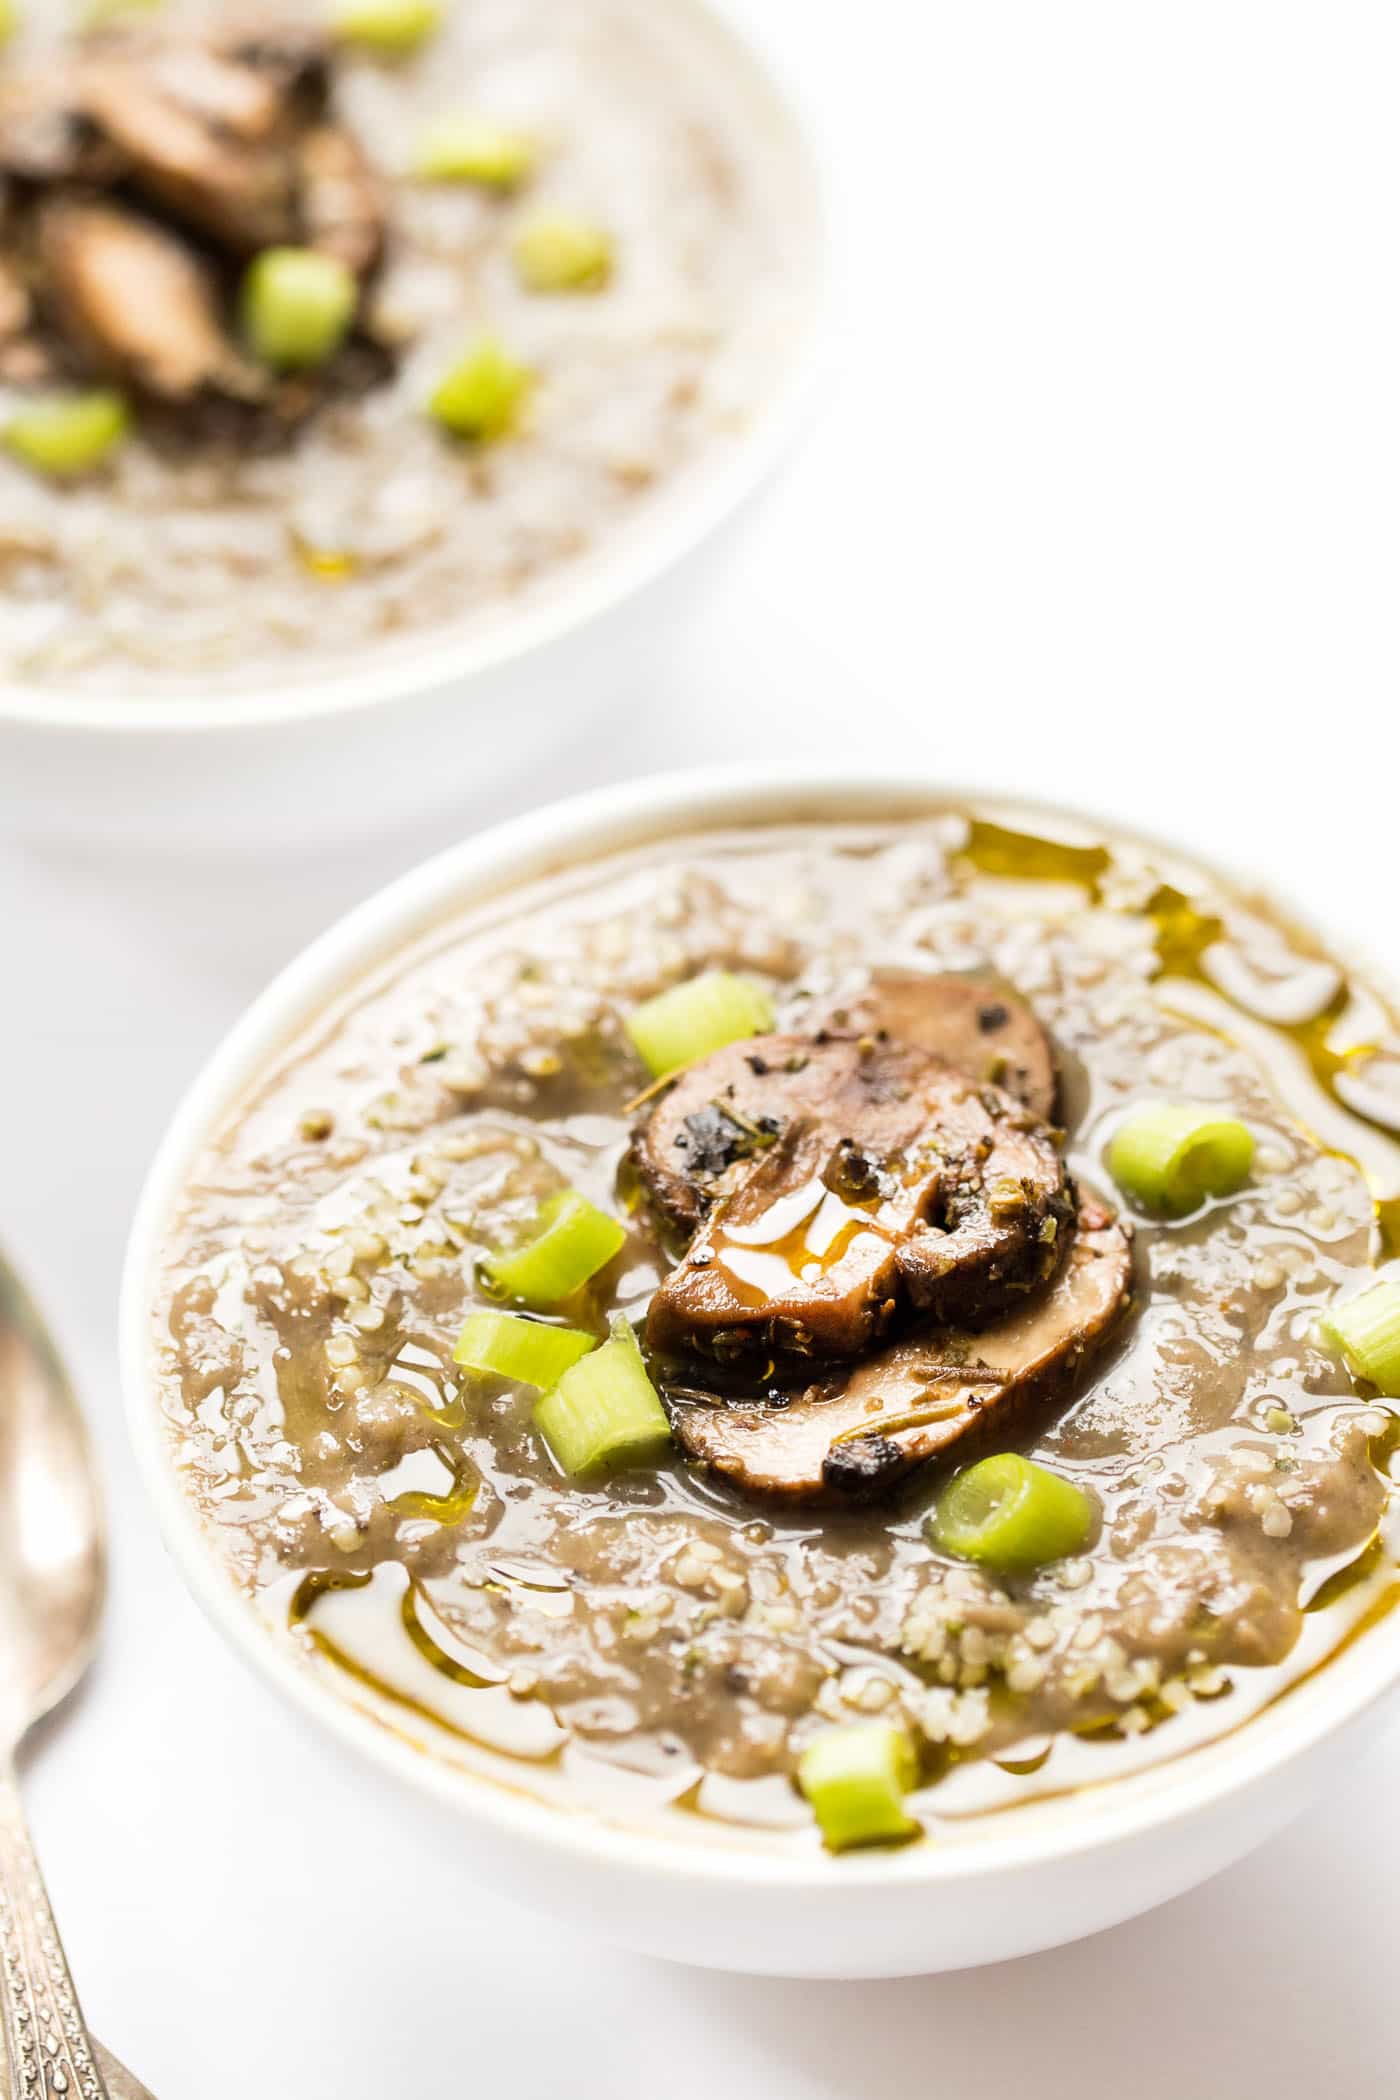 This HEALTHY White Bean & Mushroom Soup is super easy to make, has the perfect creamy texture and is packed with Italian-inspired flavors! [vegan]